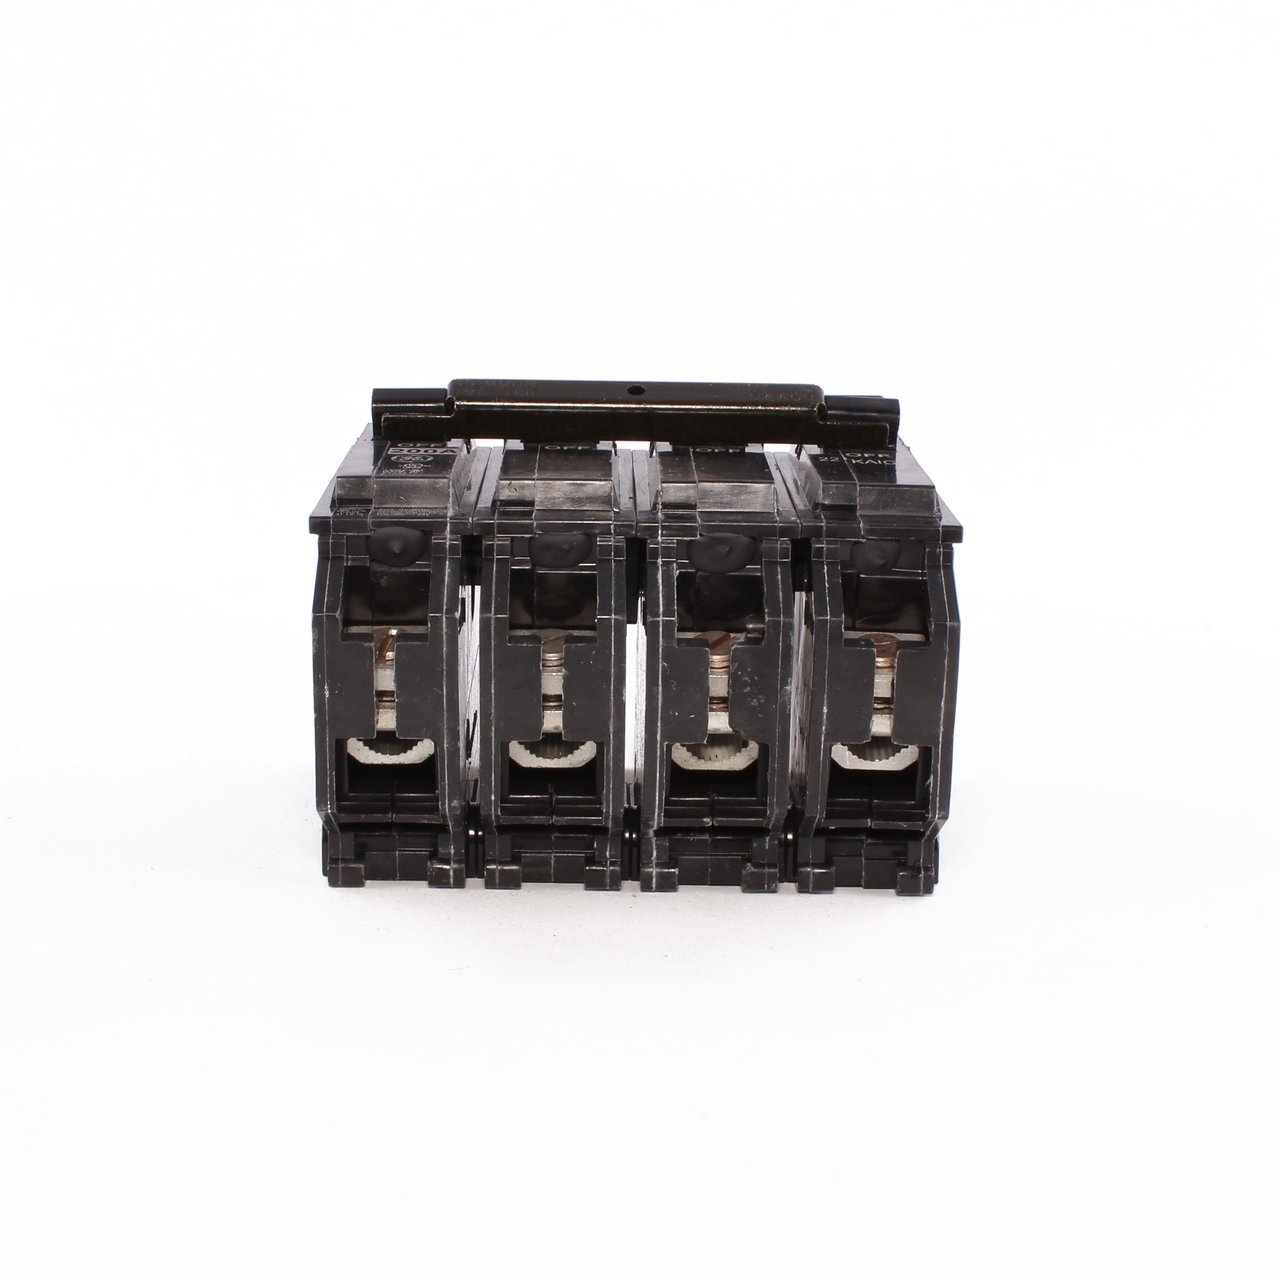 THQMV200WL - General Electrics - Molded Case Circuit Breakers